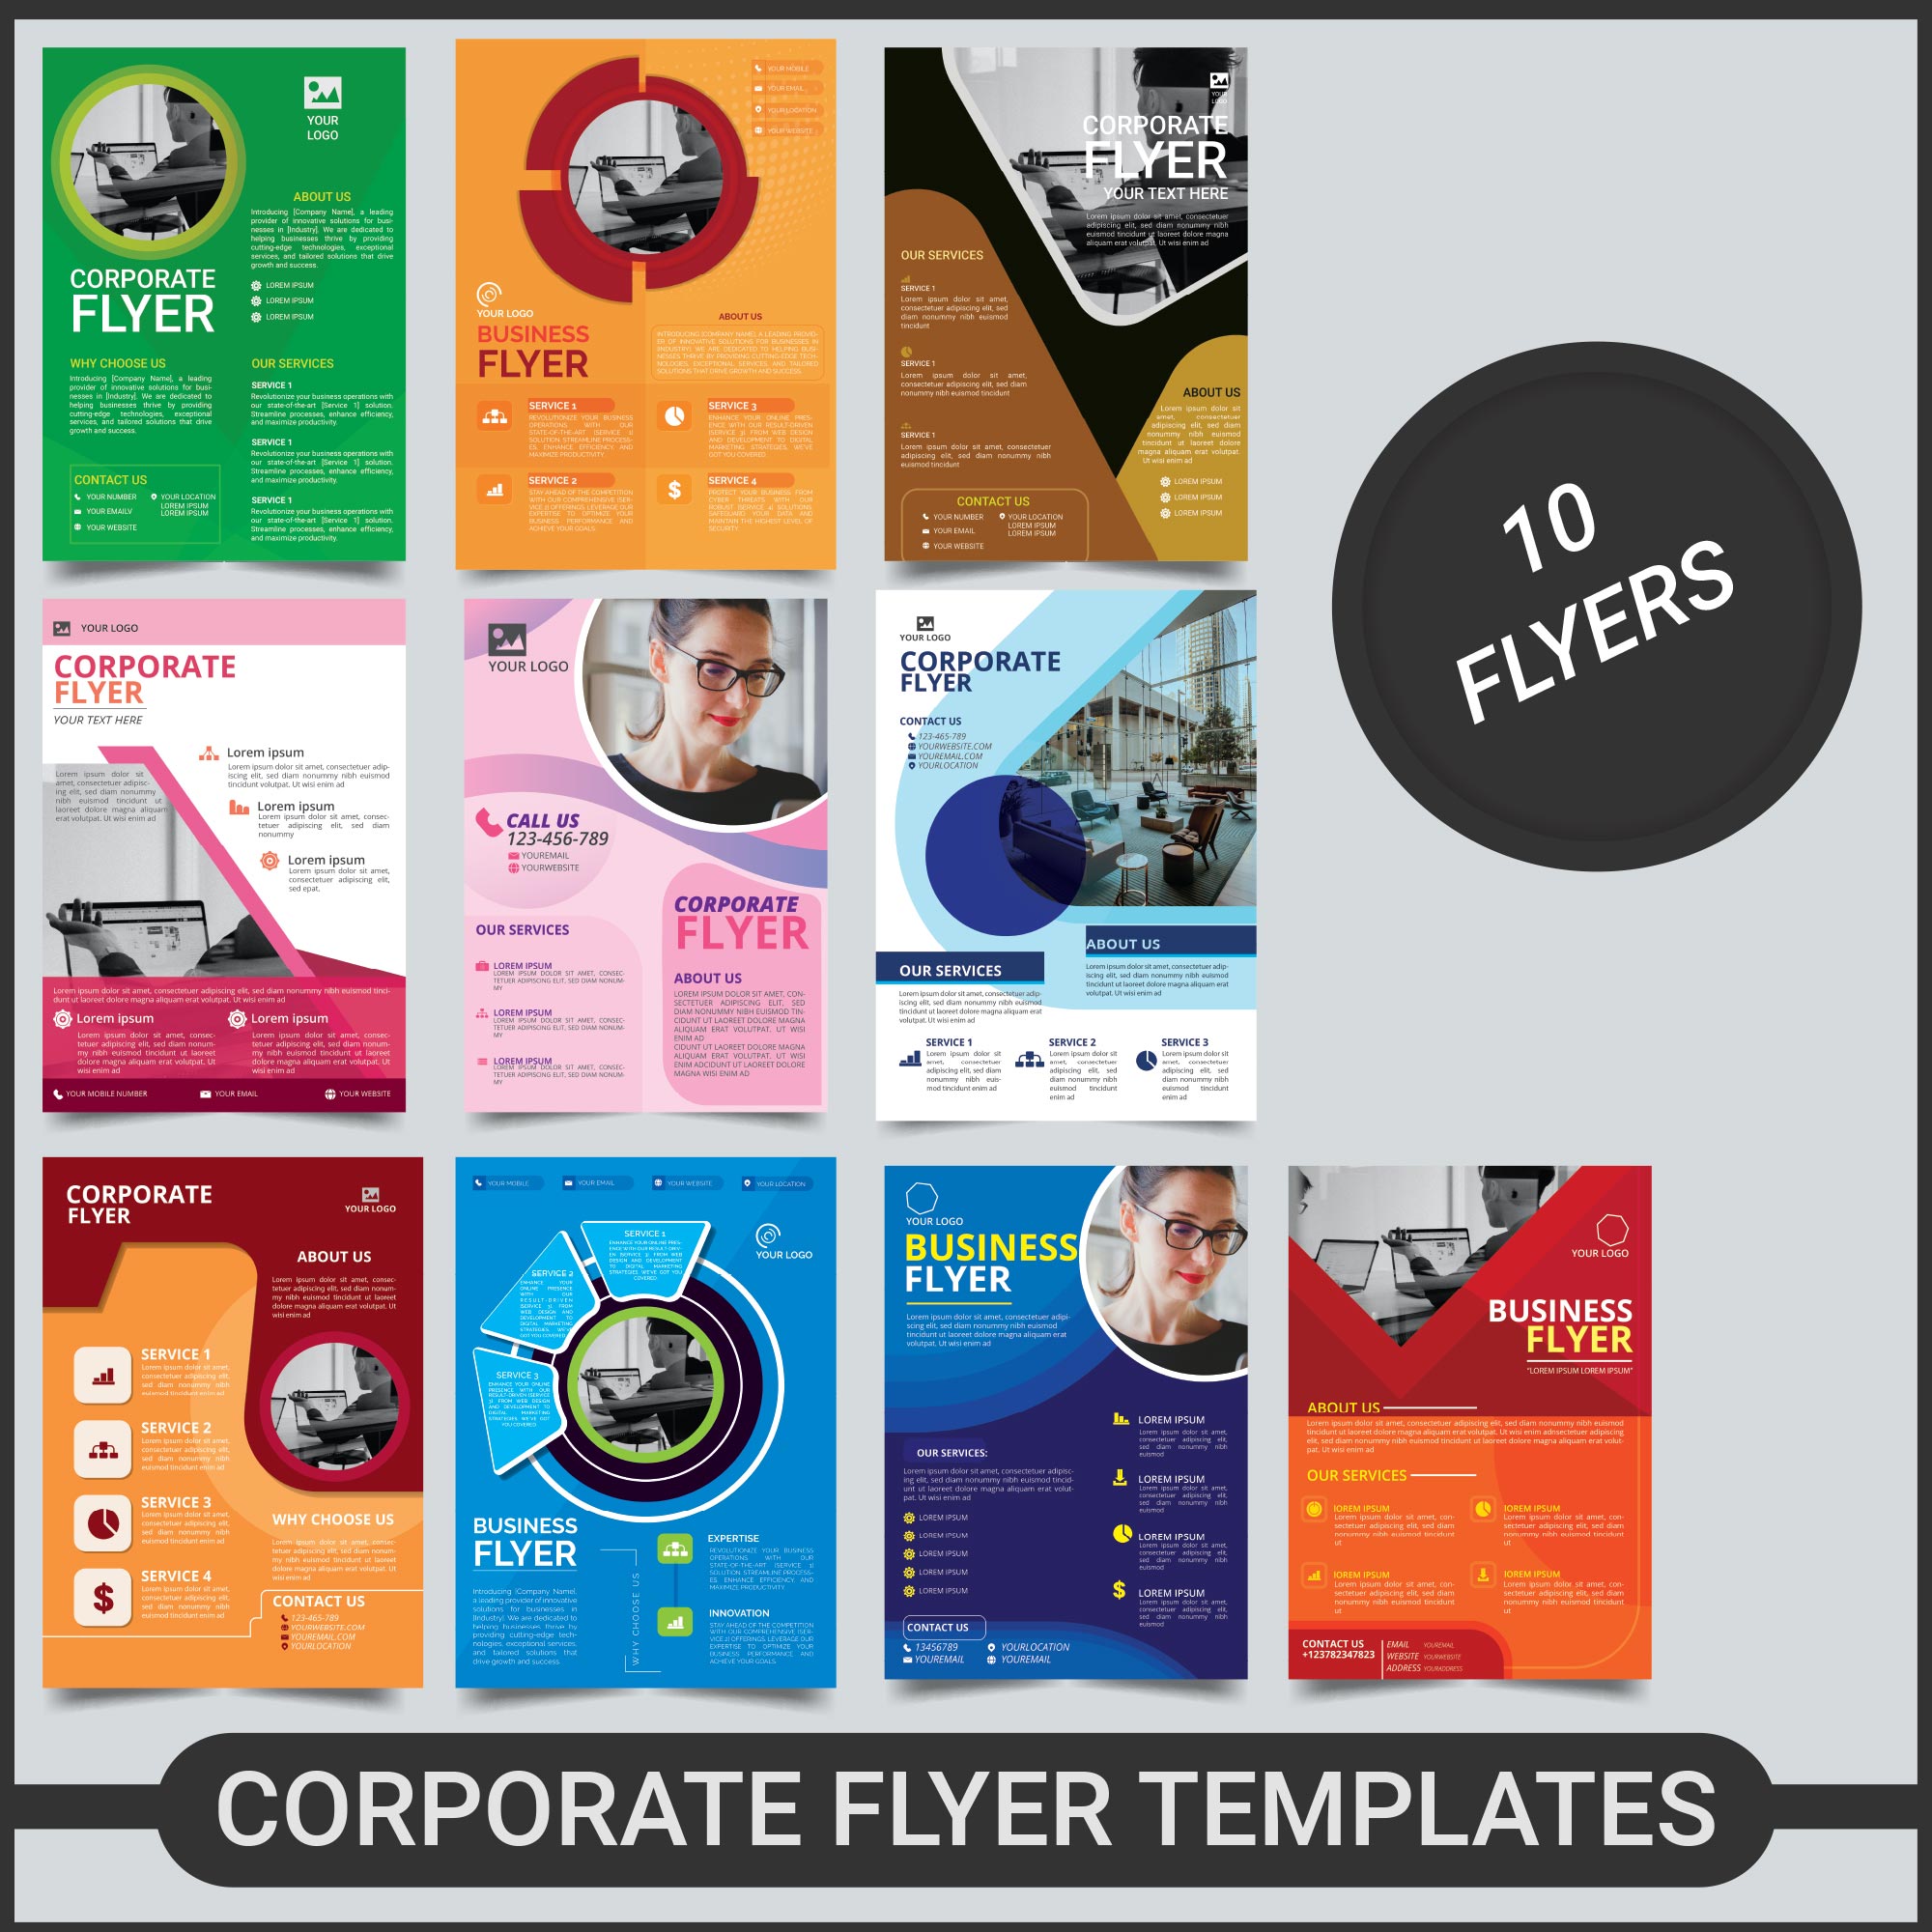 Corporate flyer templates preview image.